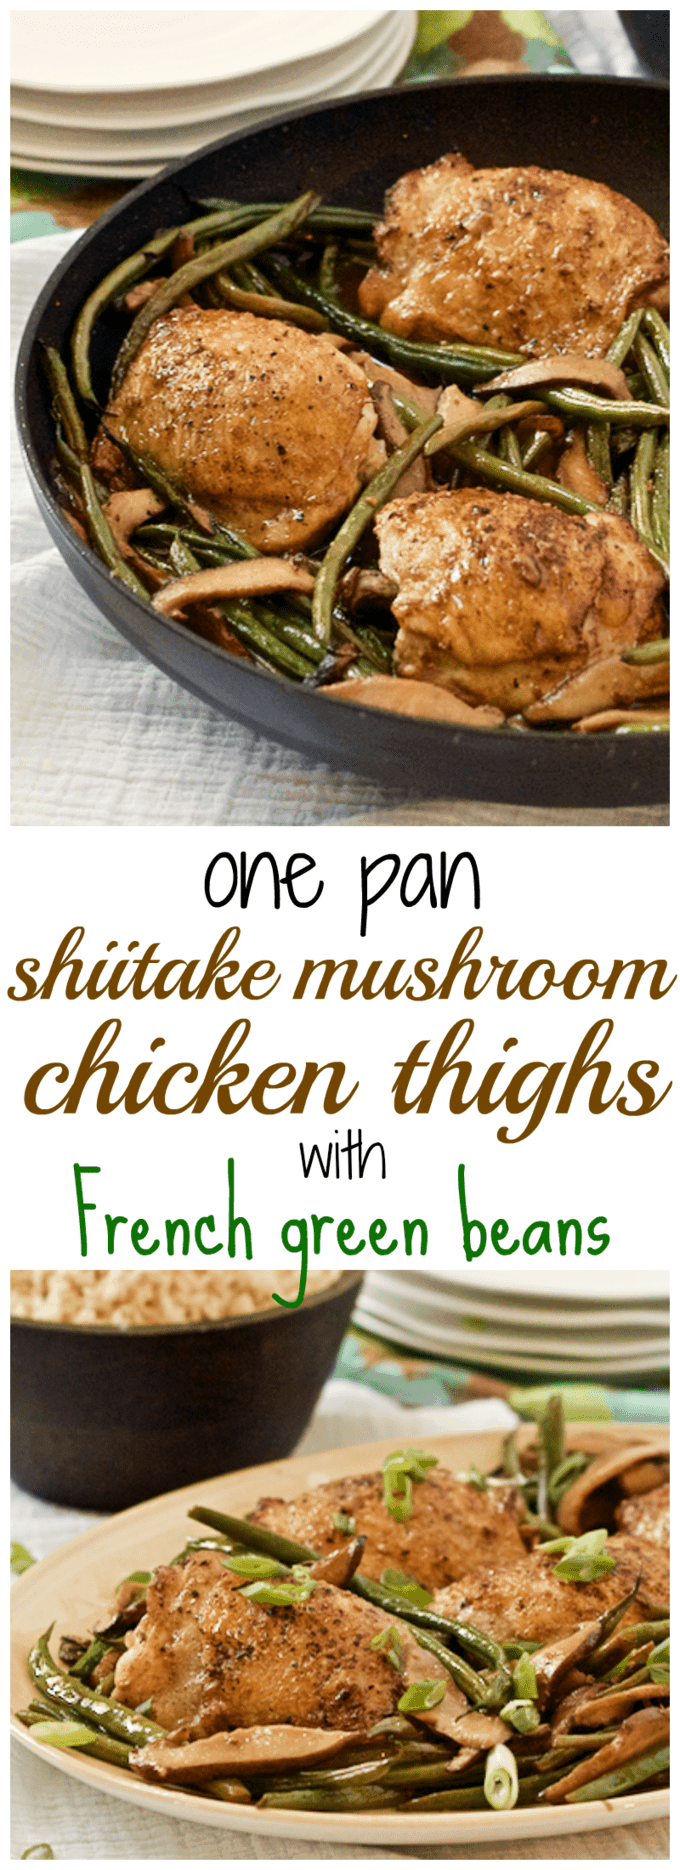 A 30-minute dinner of browned chicken thighs with shiitake mushrooms and French green beans - all made in the same skillet! | FamilyFoodontheTable.com